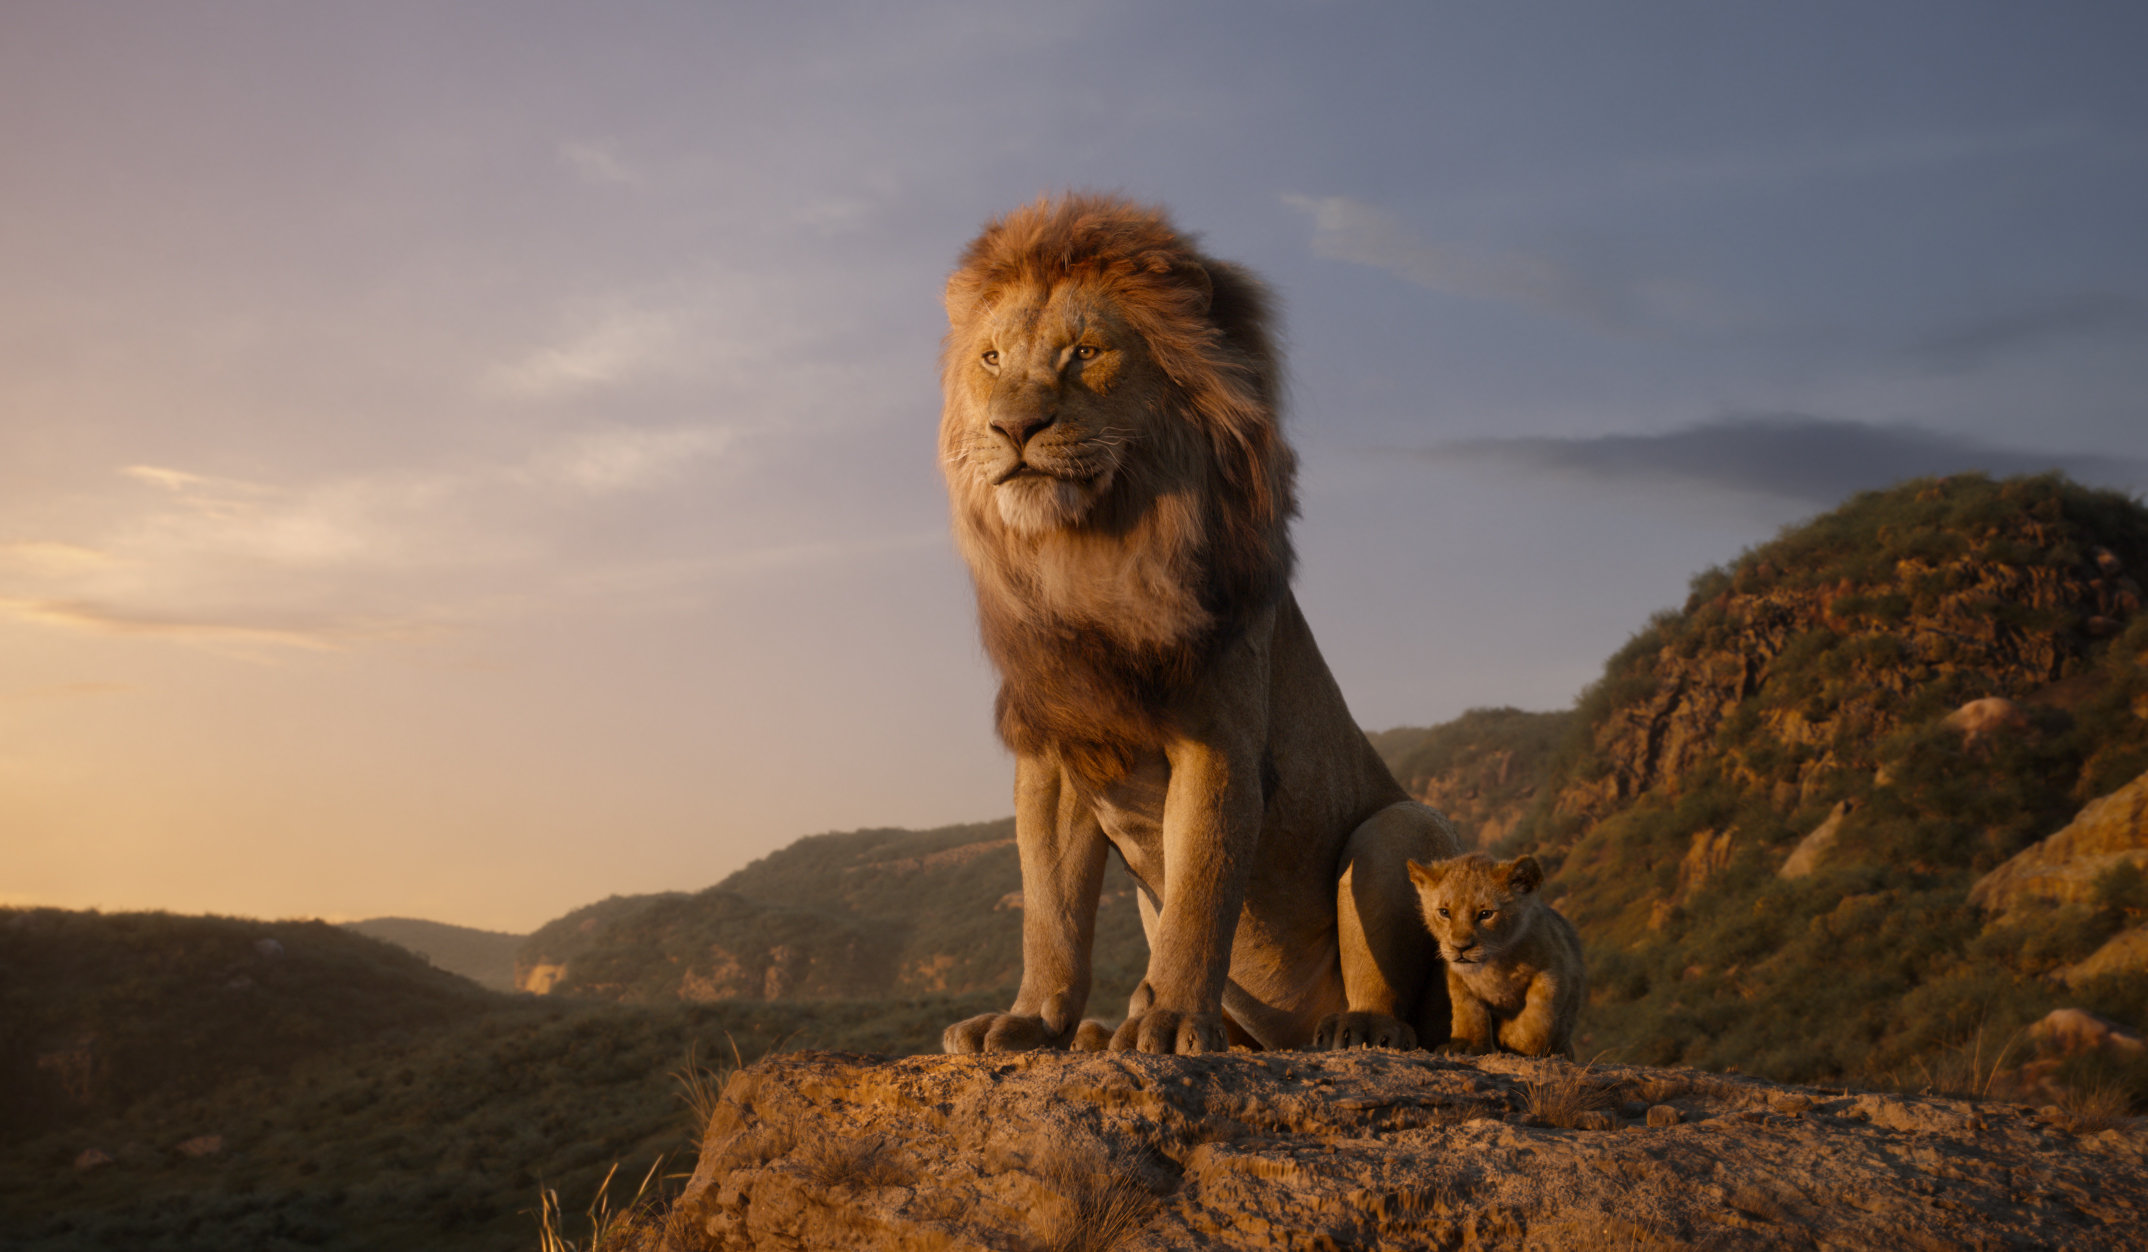 Experience Disney’s The Lion King At The El Capitan Theater in Hollywood